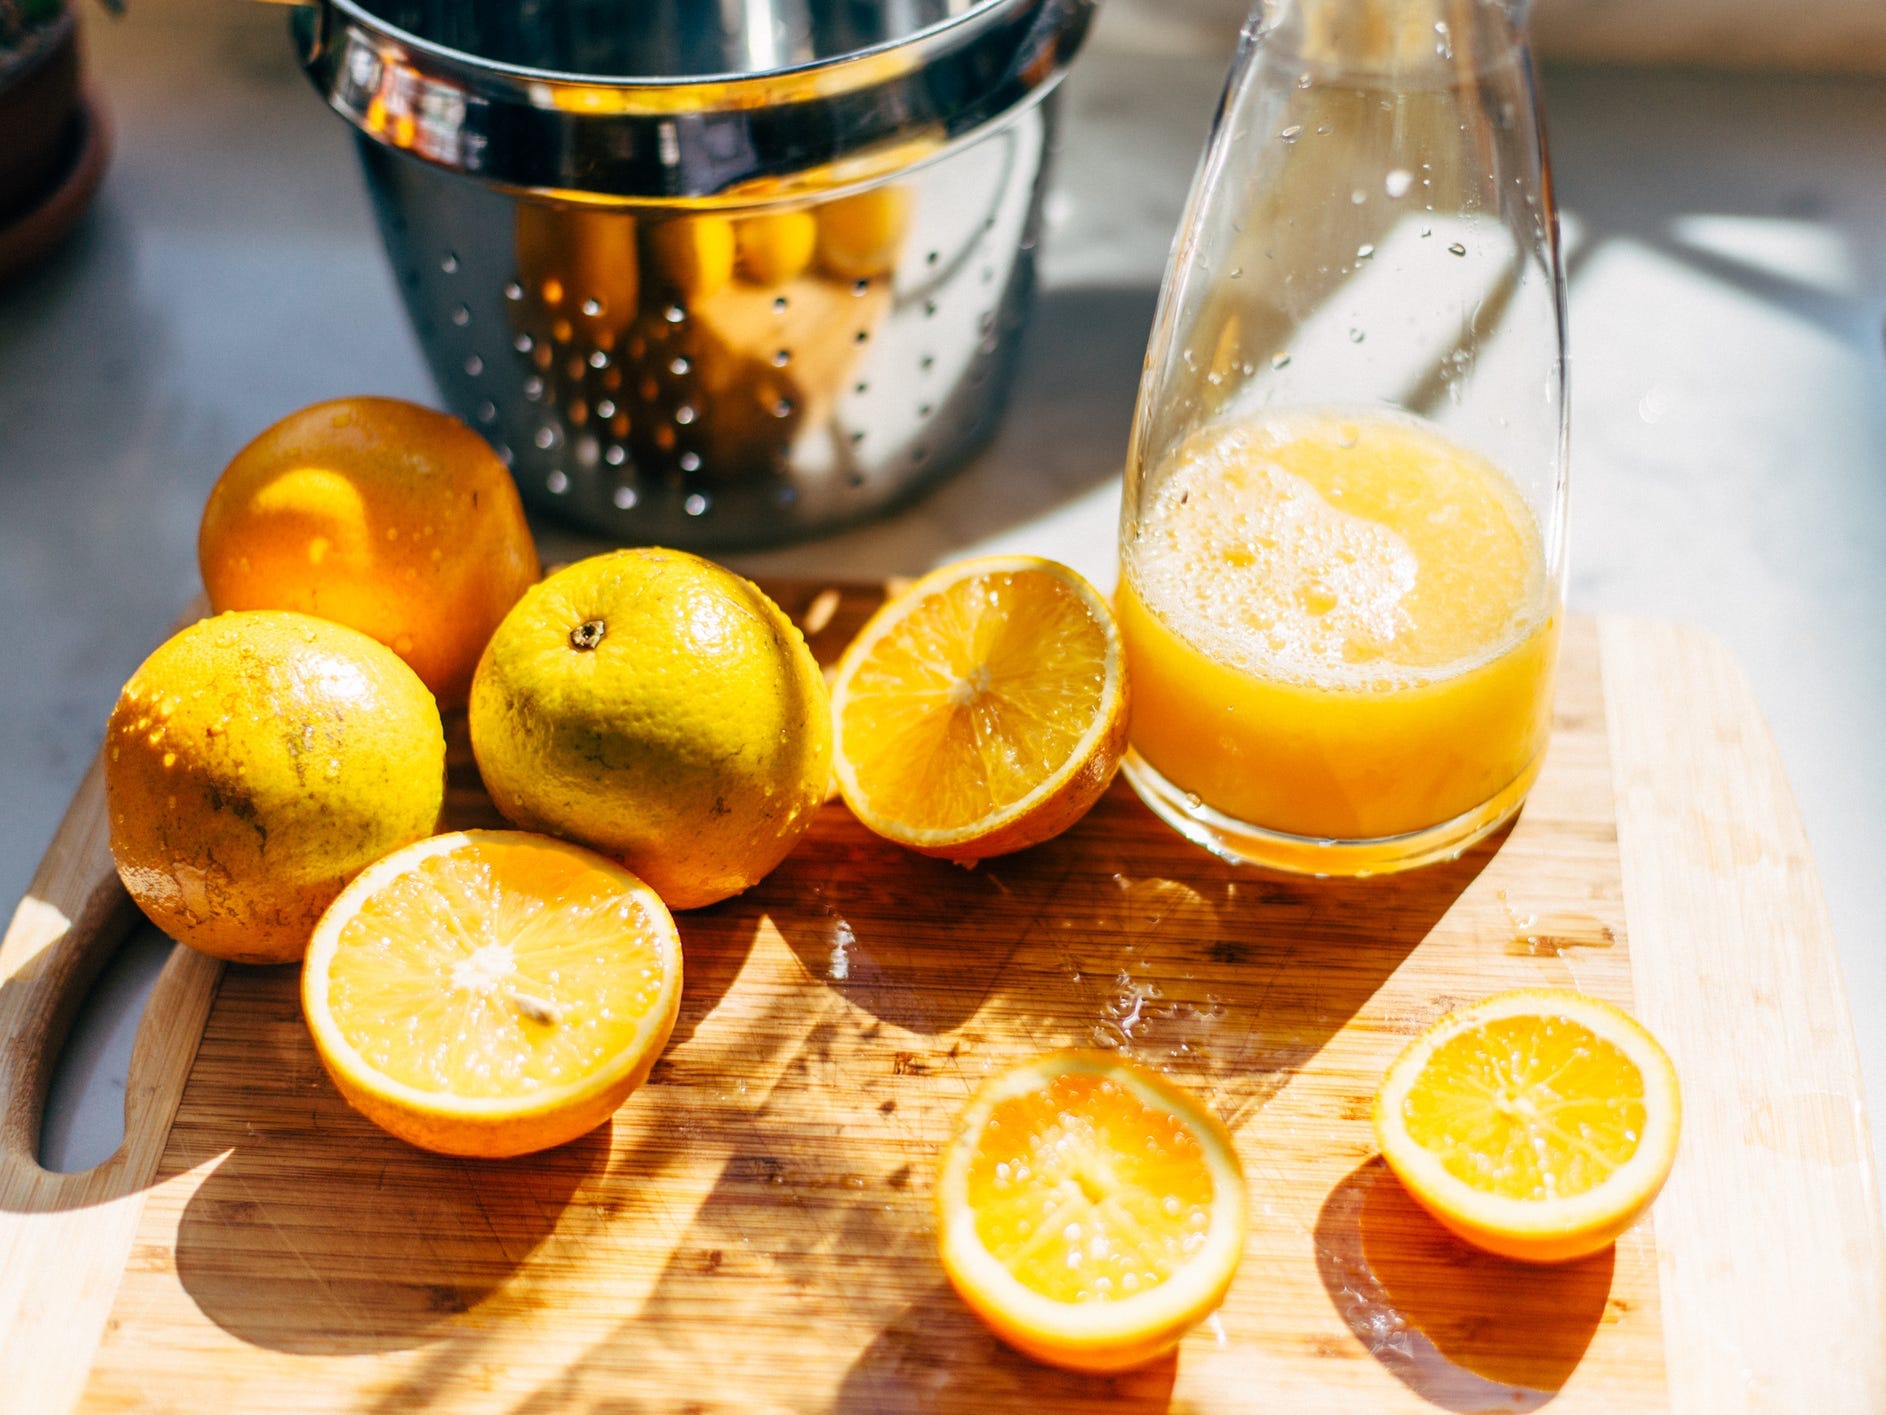 Orange halves on a cutting board next to a pitcher with orange juice in it